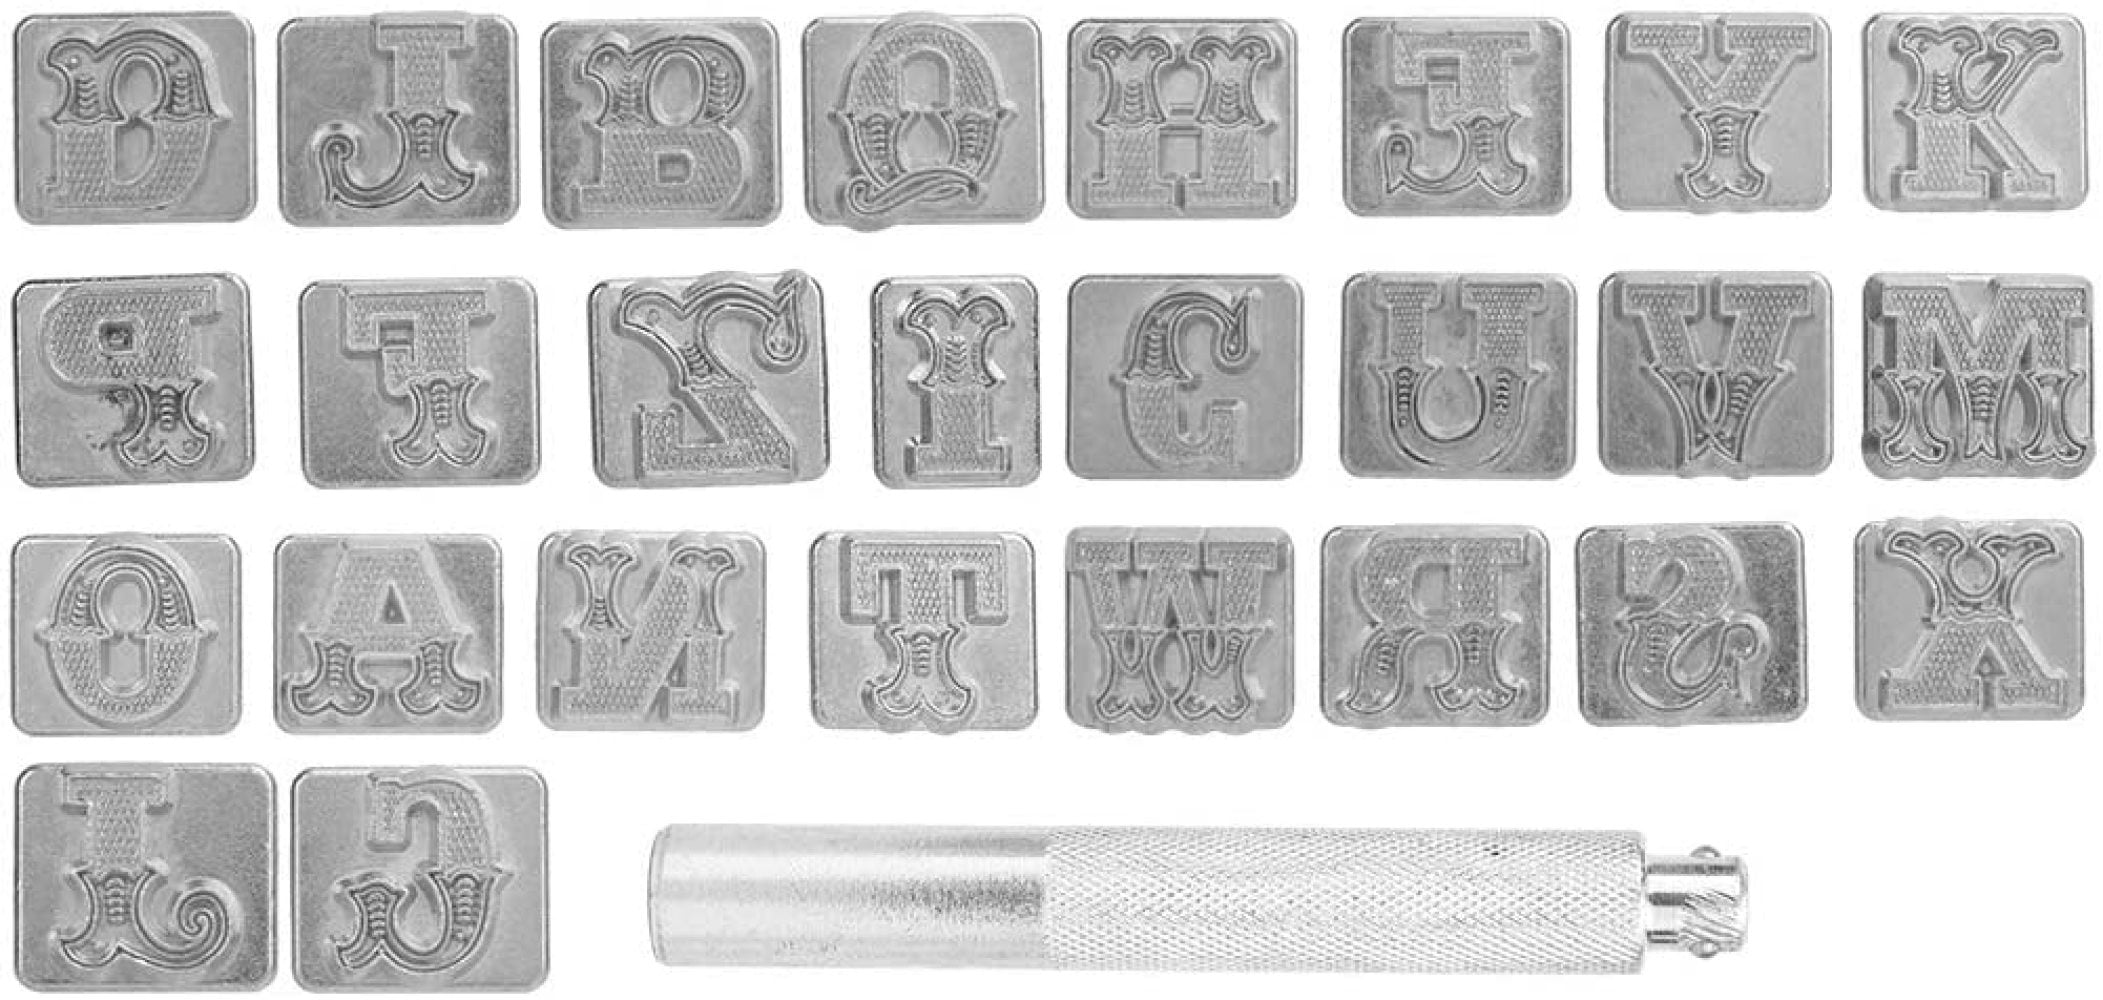 A-Z Capital Letter 3/4" Alphabet Leather Craft Stamping Set Heavy Duty Punch 